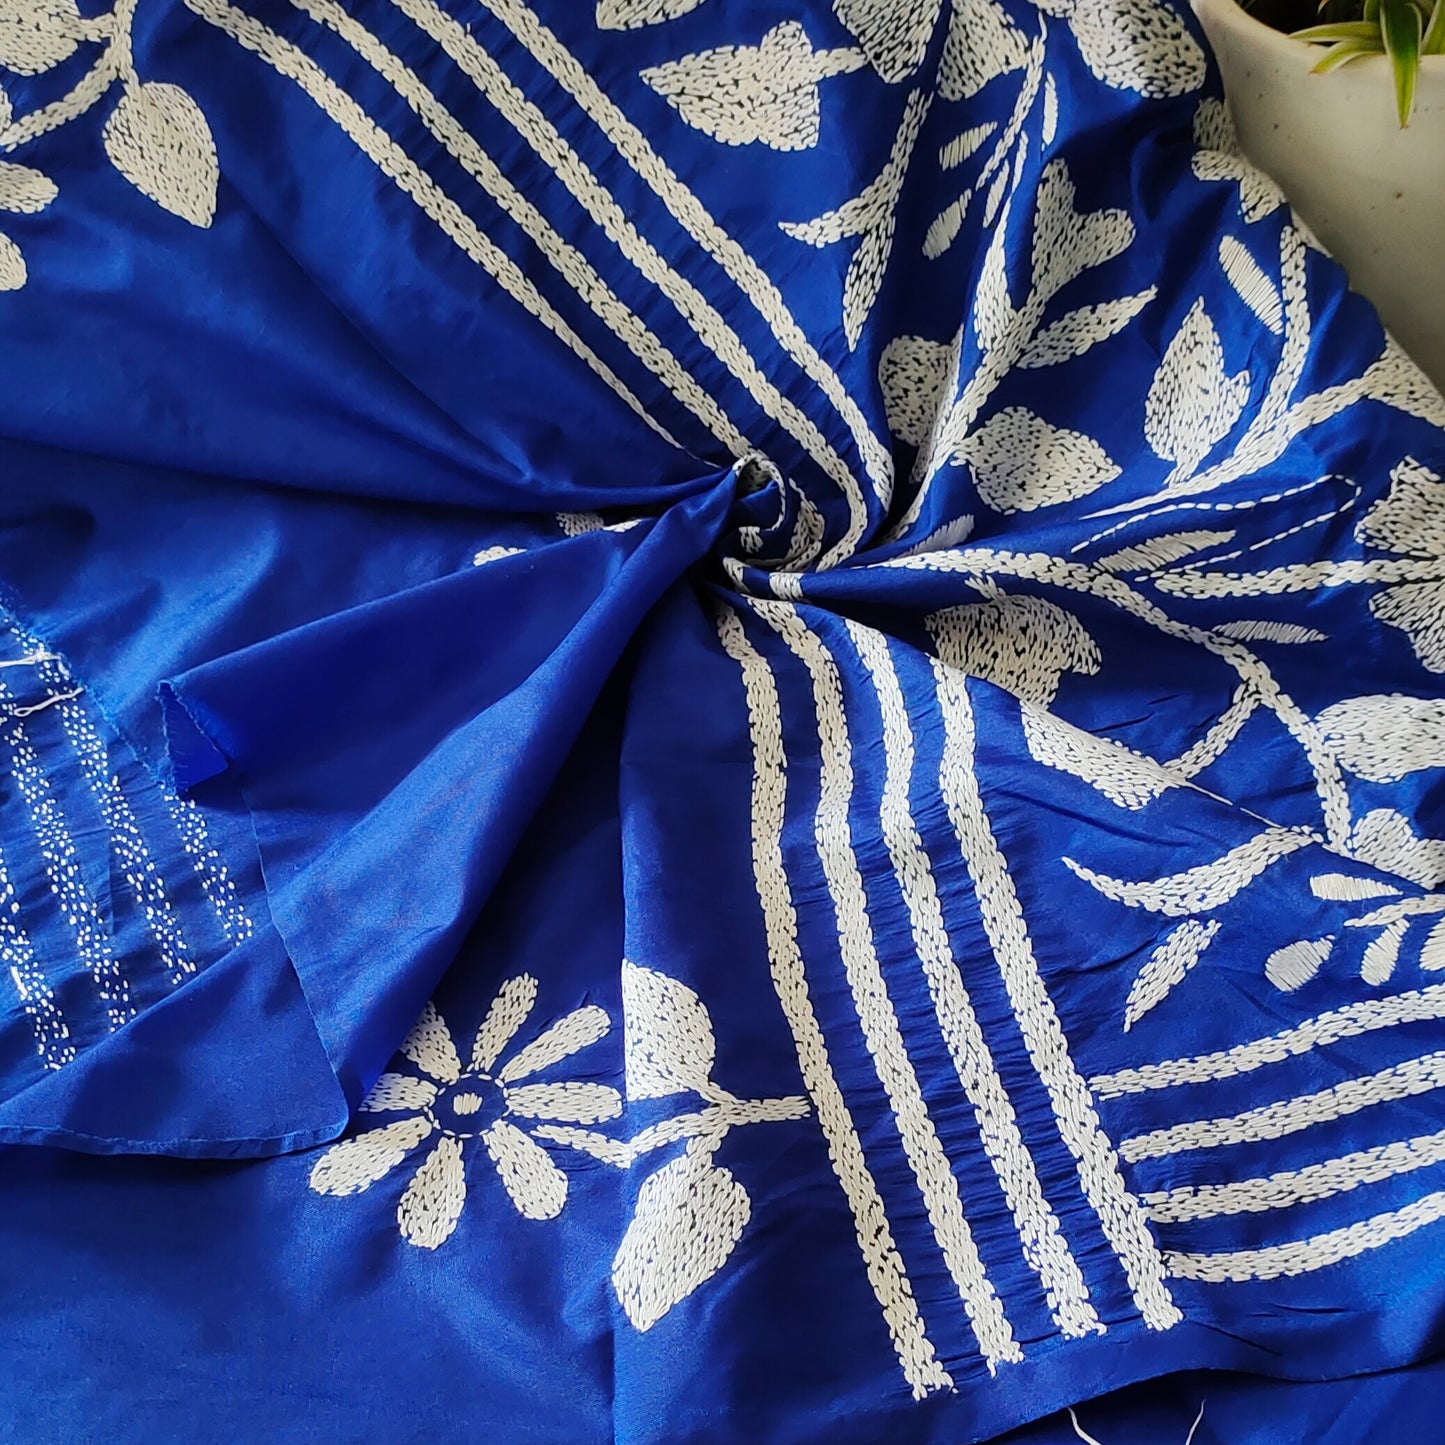 Regal Blooms: Royal Blue Kantha Saree with White Floral Embroidery